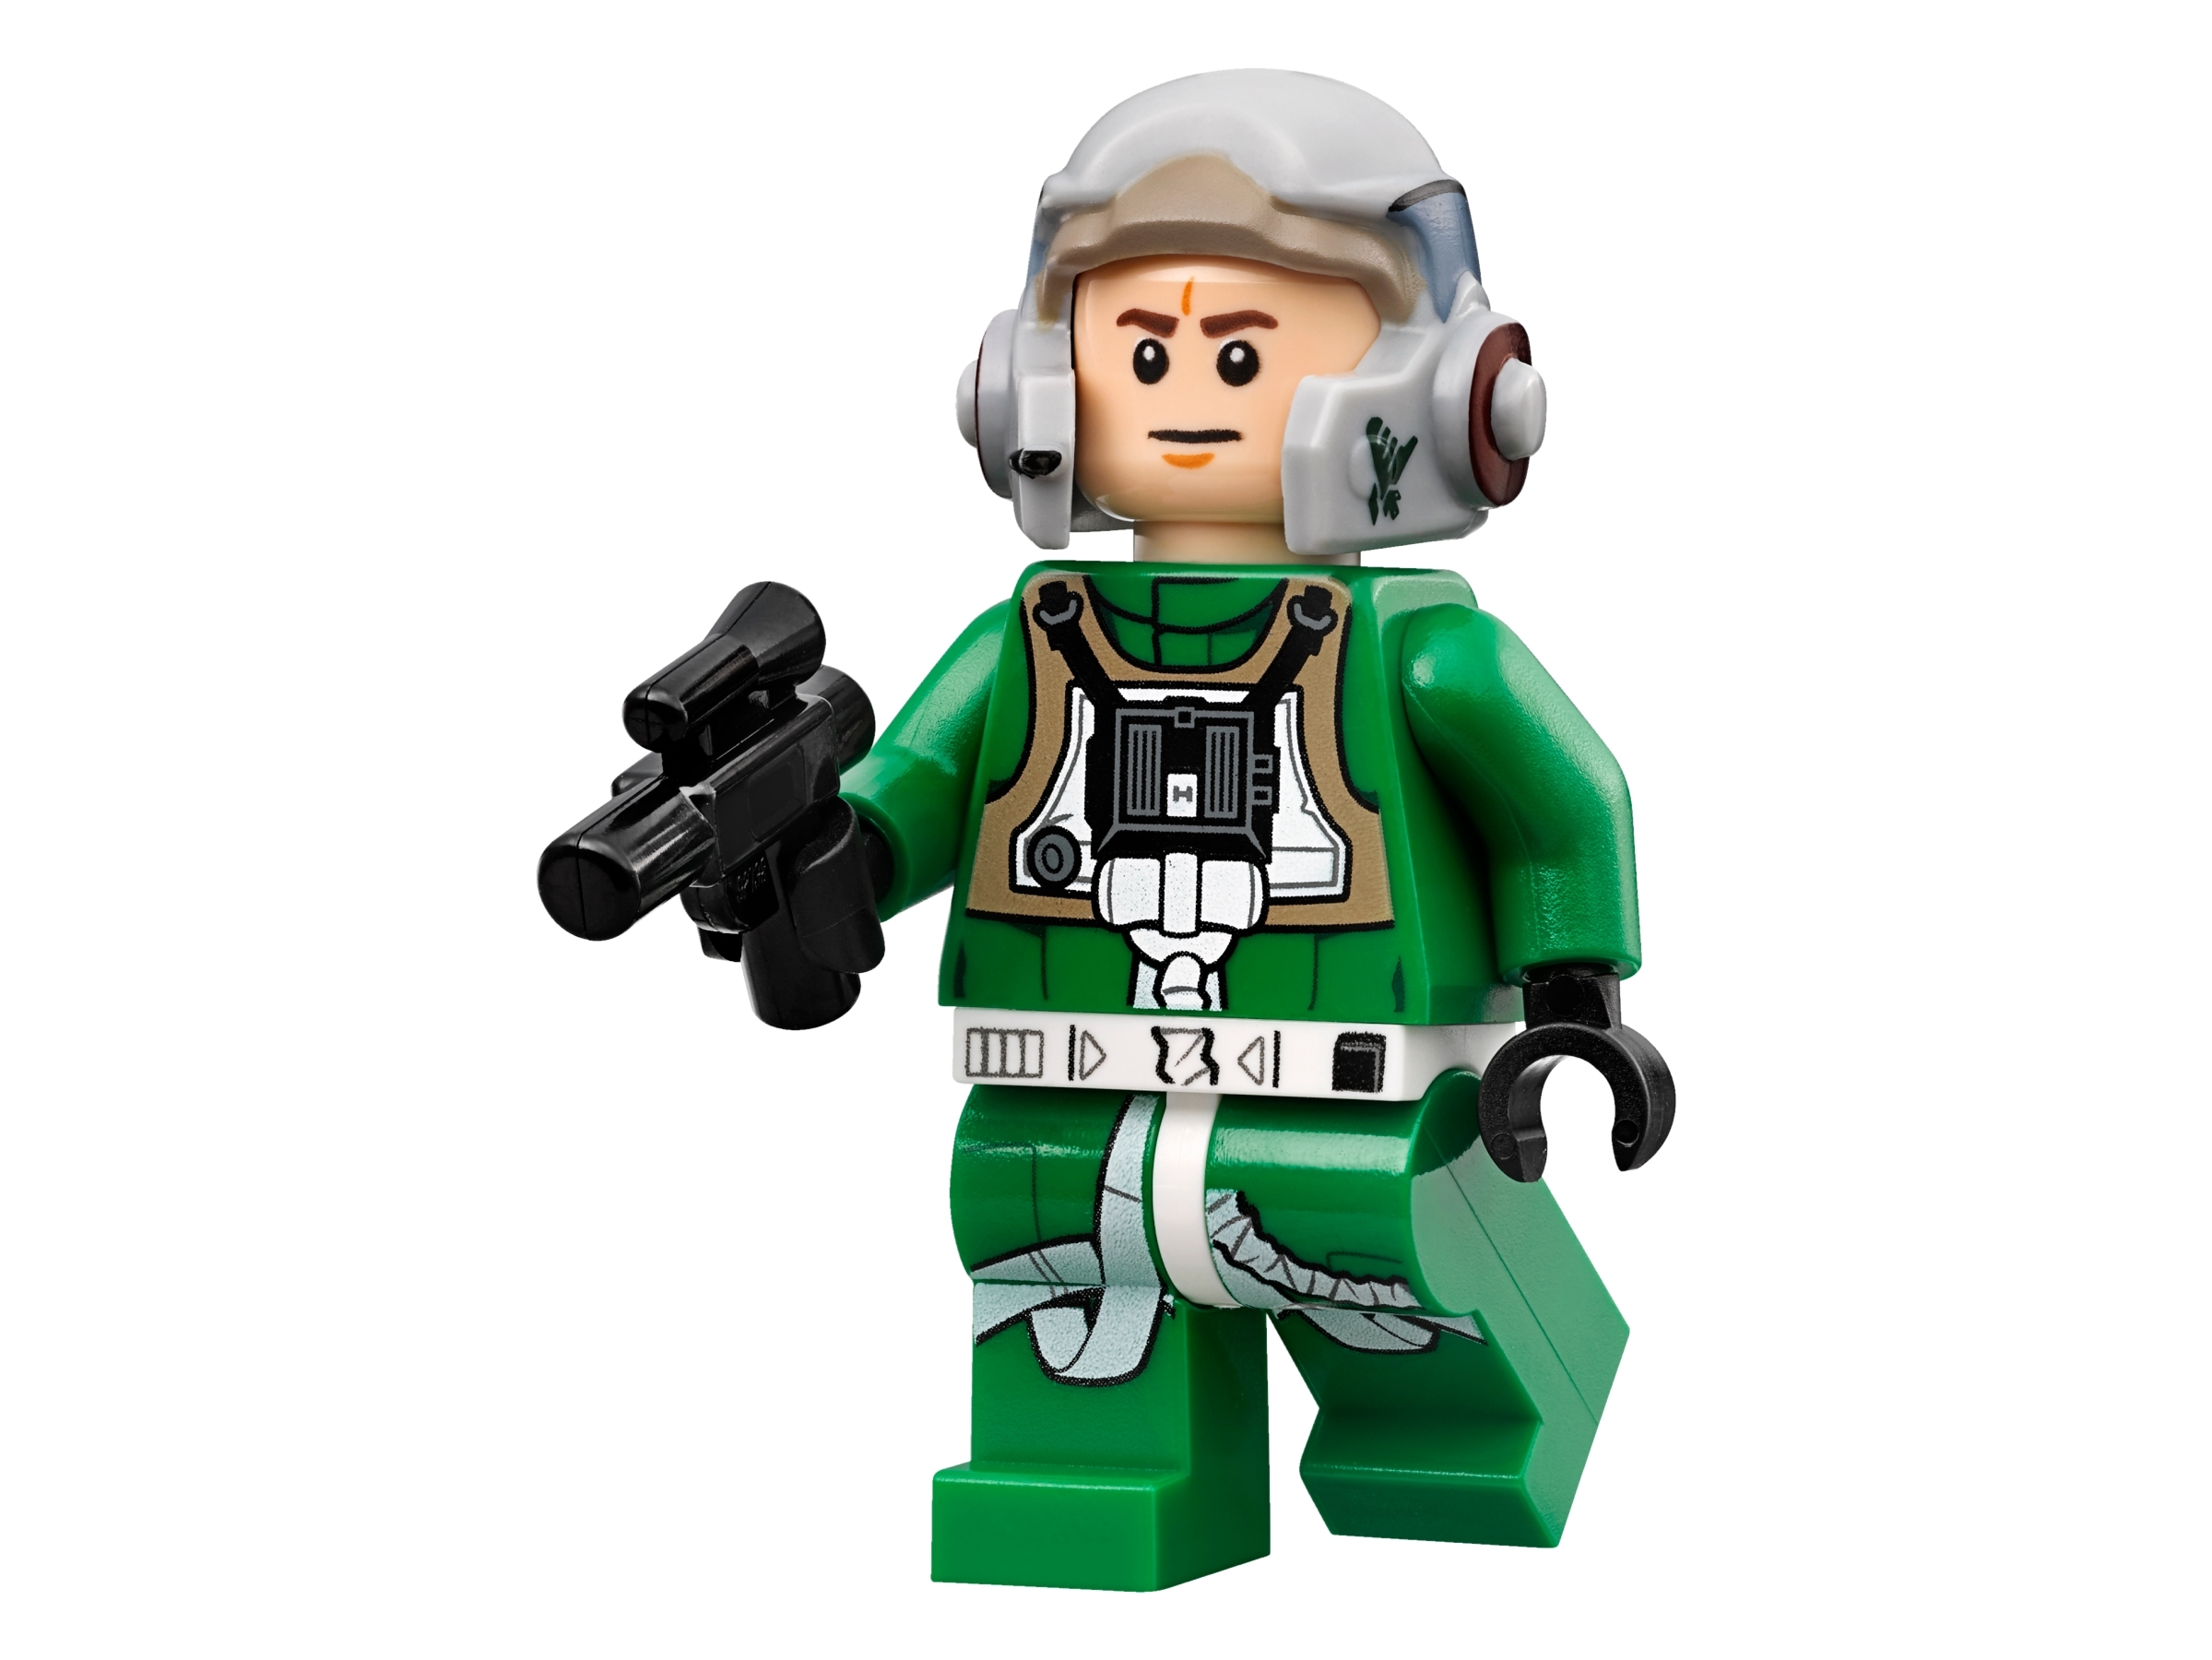 LEGO Star Wars Rebel A-wing Pilot Minifigure from 75175 